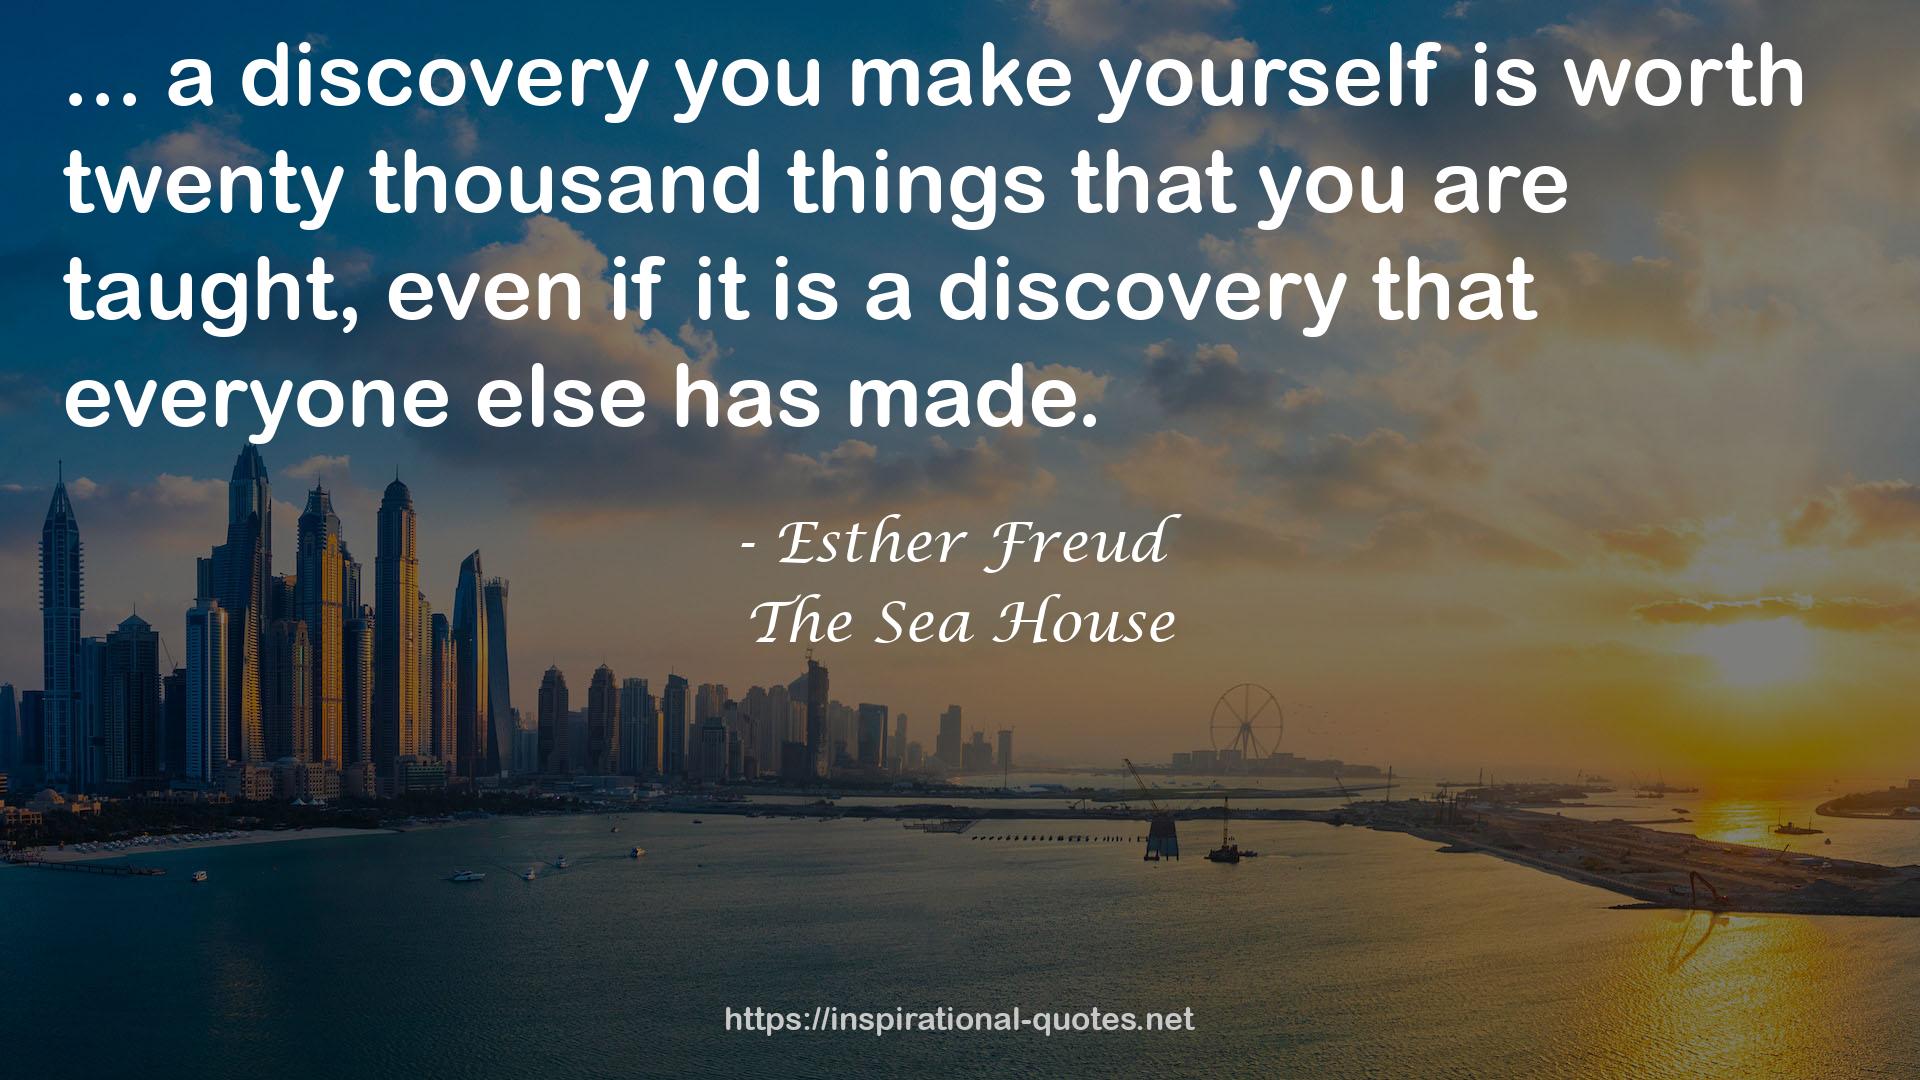 The Sea House QUOTES